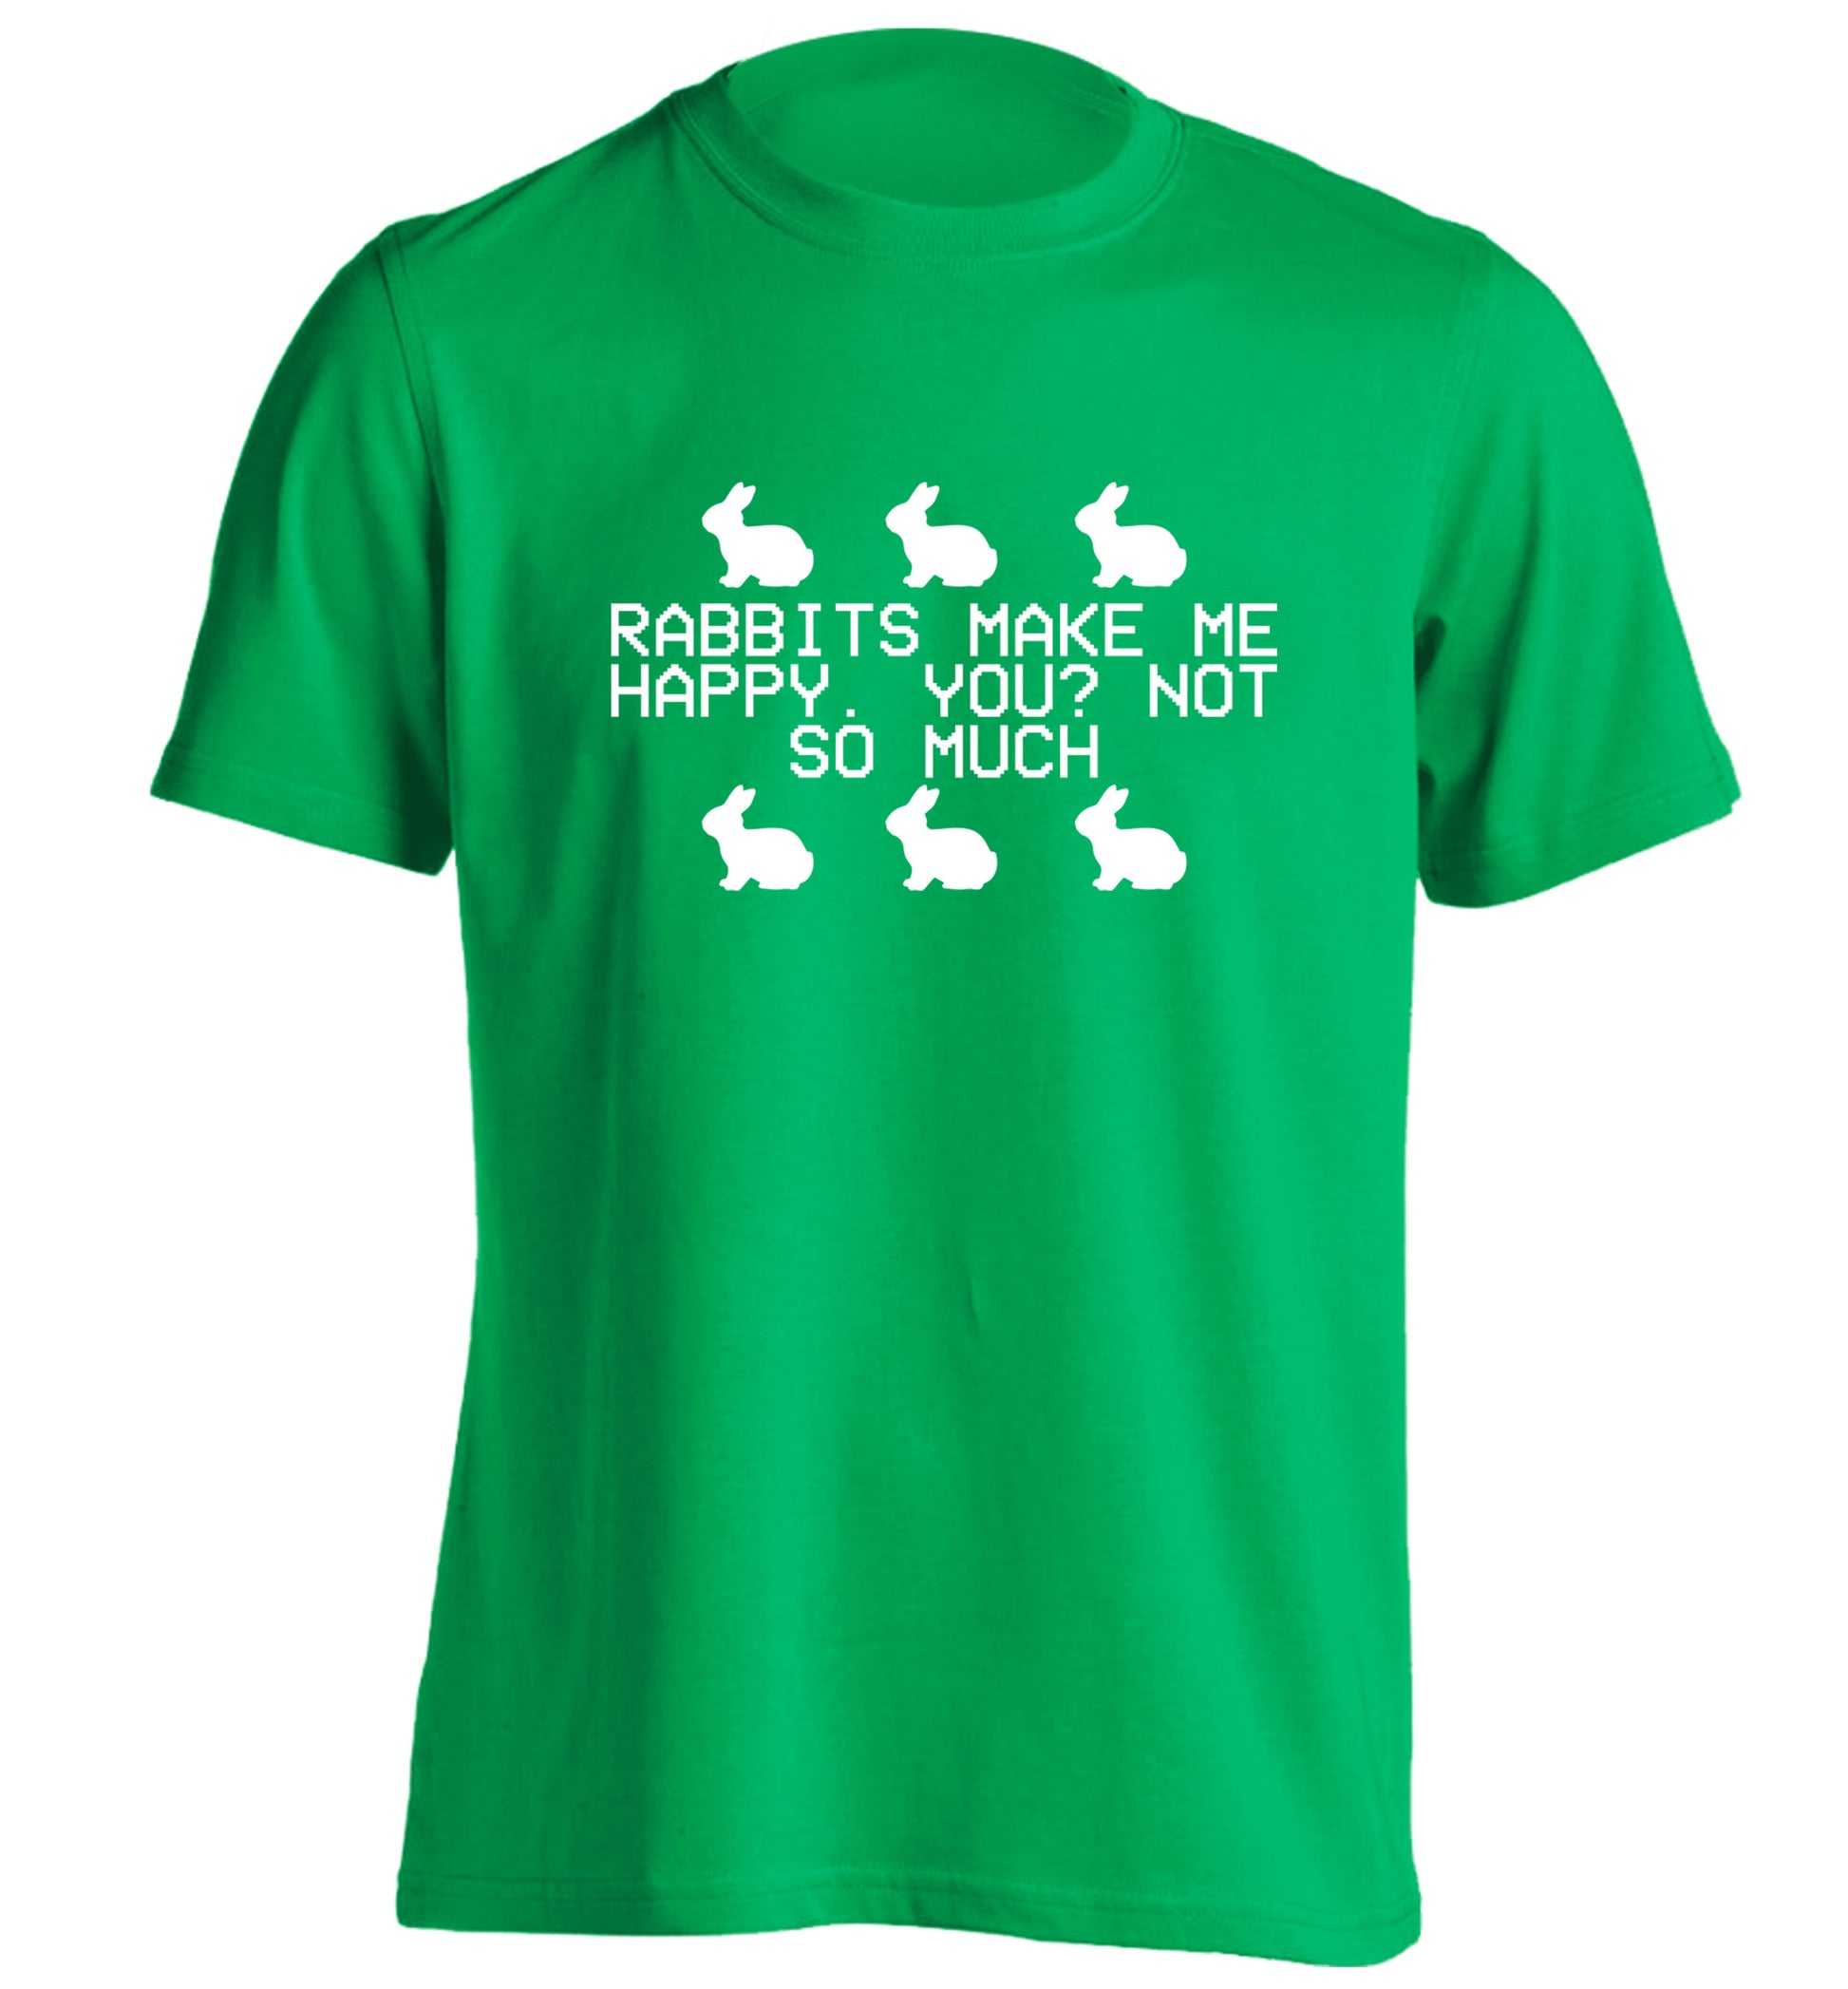 Rabbits make me happy, you not so much adults unisex green Tshirt 2XL